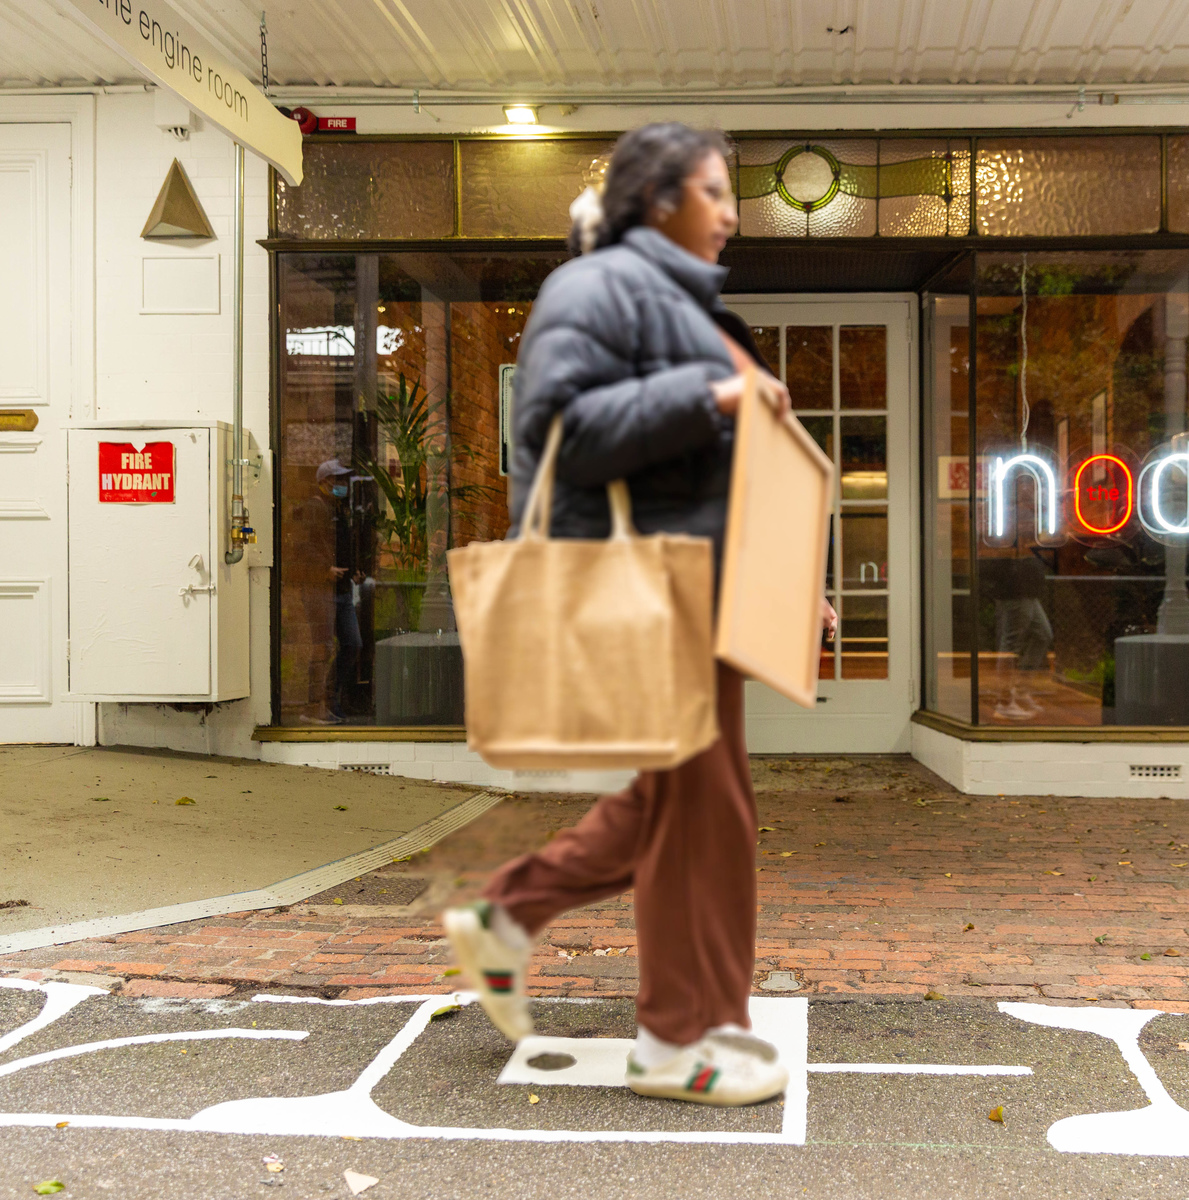 A person carrying shopping bags and walking over white painted footpath art in front of a shop